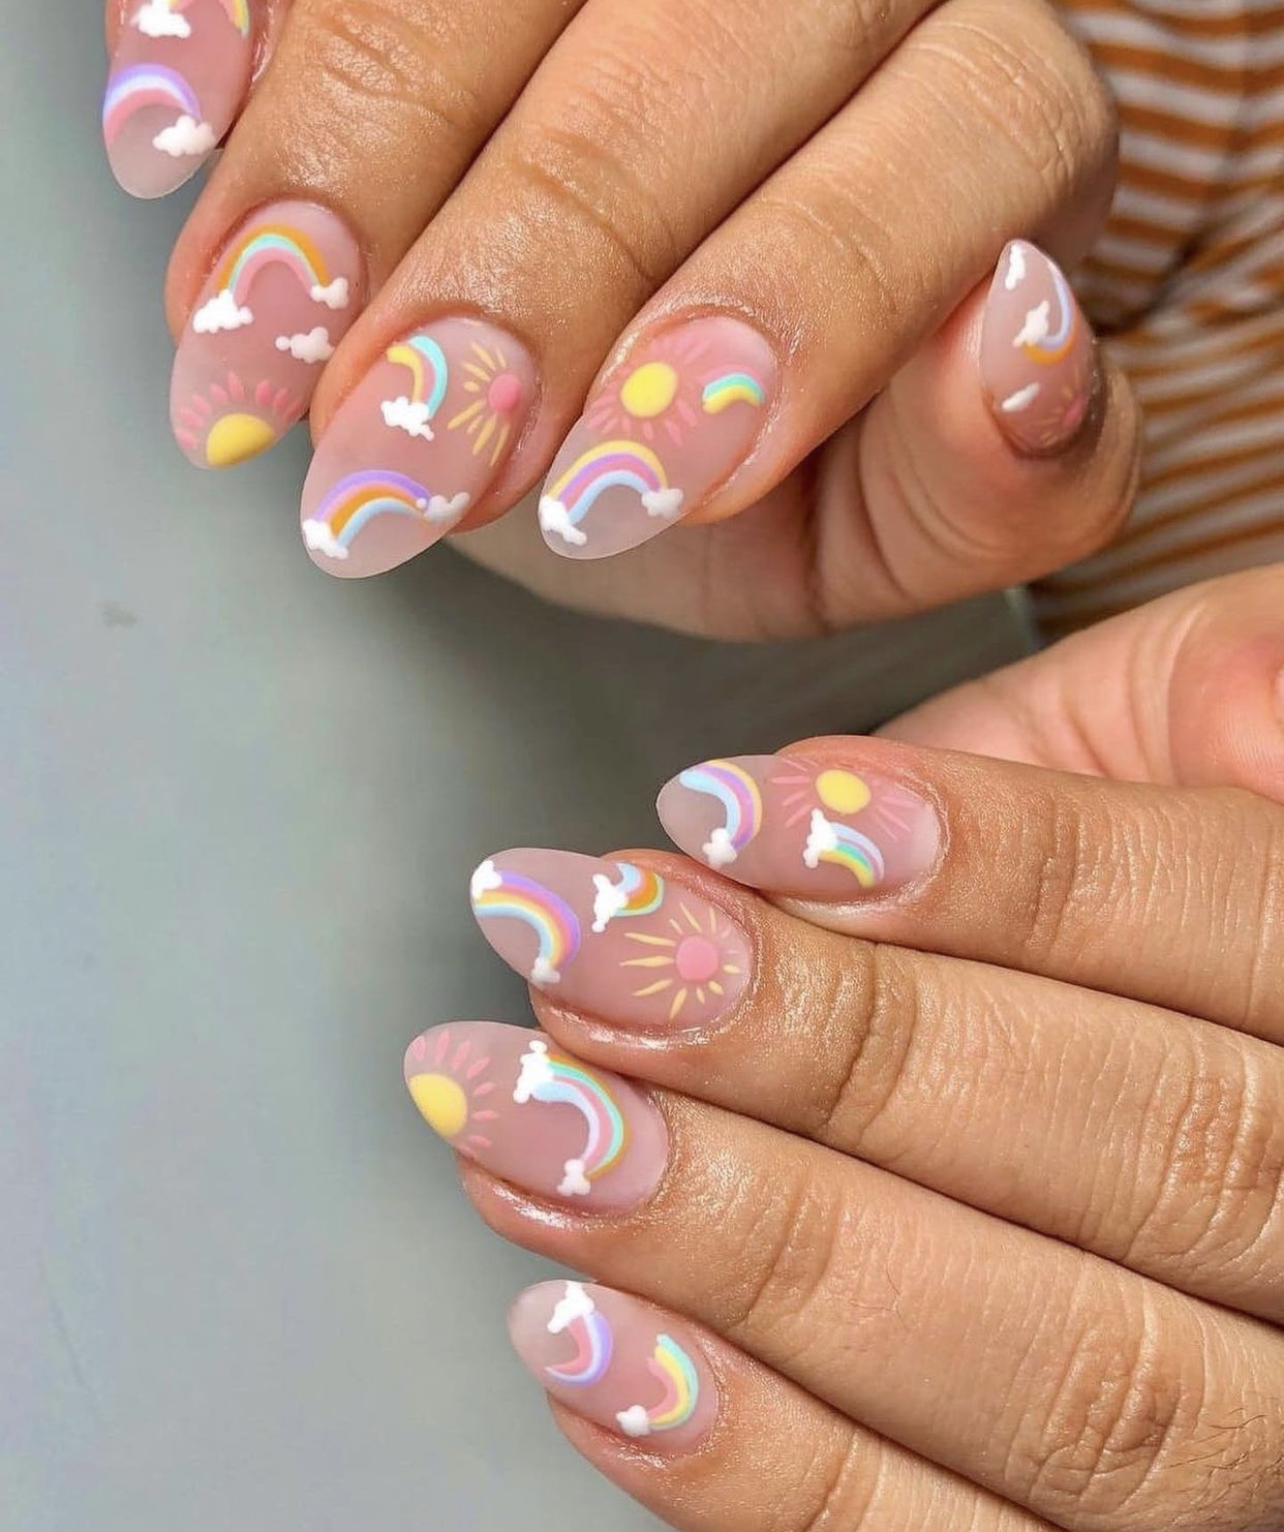 nails with mini rainbows and suns